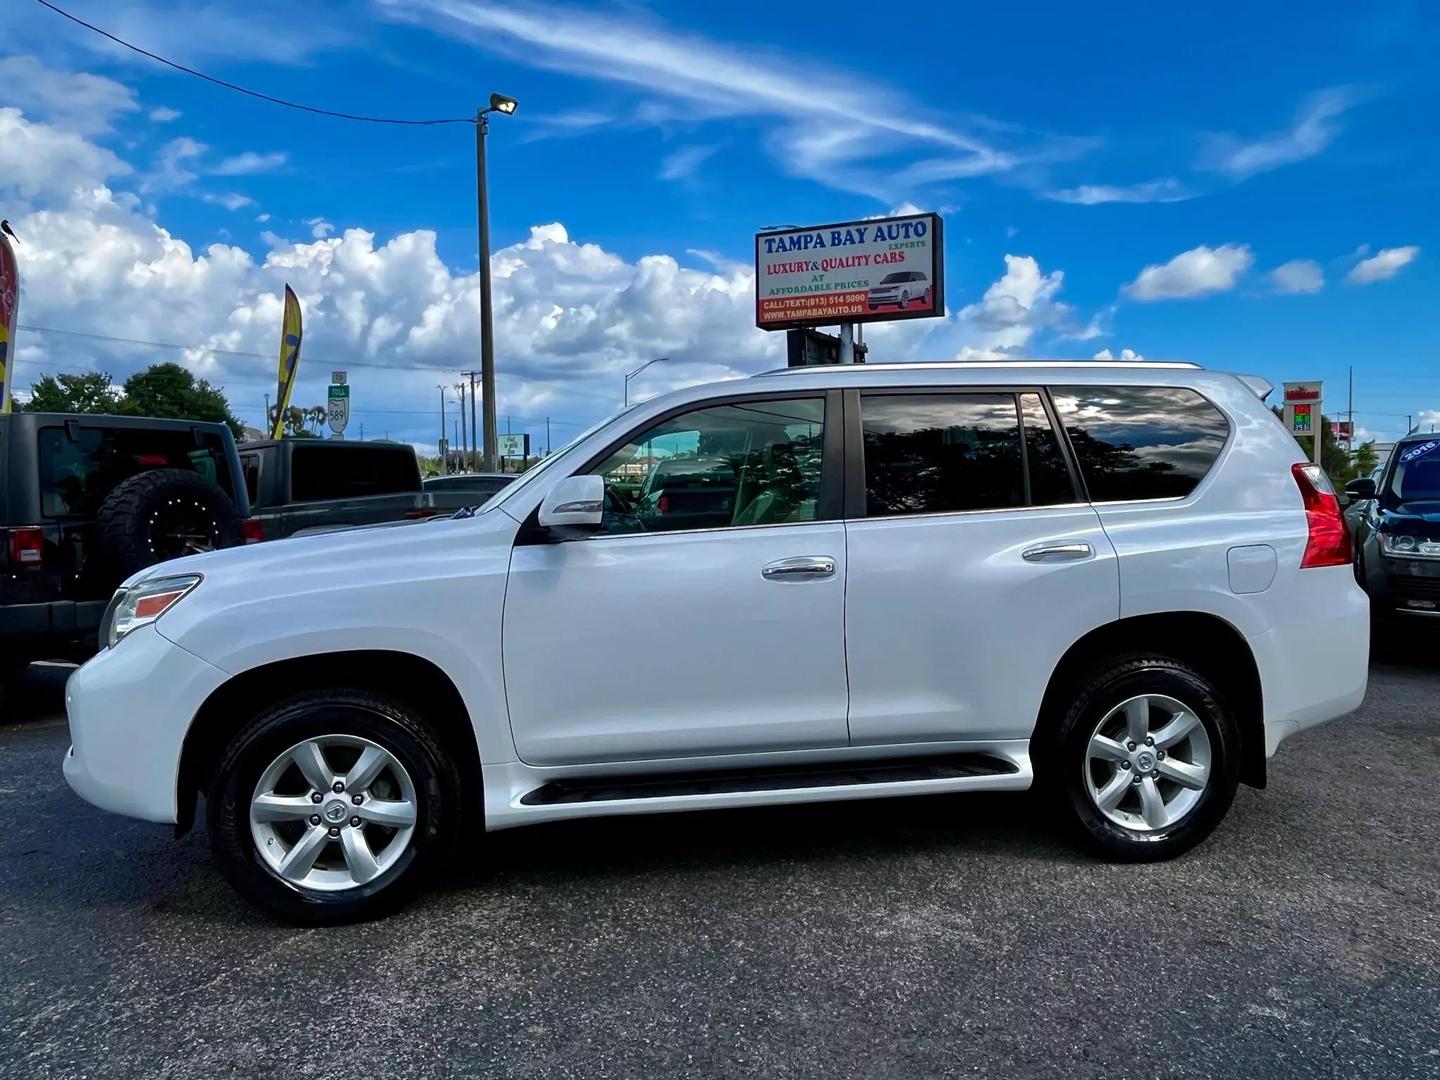 Used 2010 Lexus GX Base with VIN JTJBM7FX7A5017678 for sale in Tampa, FL